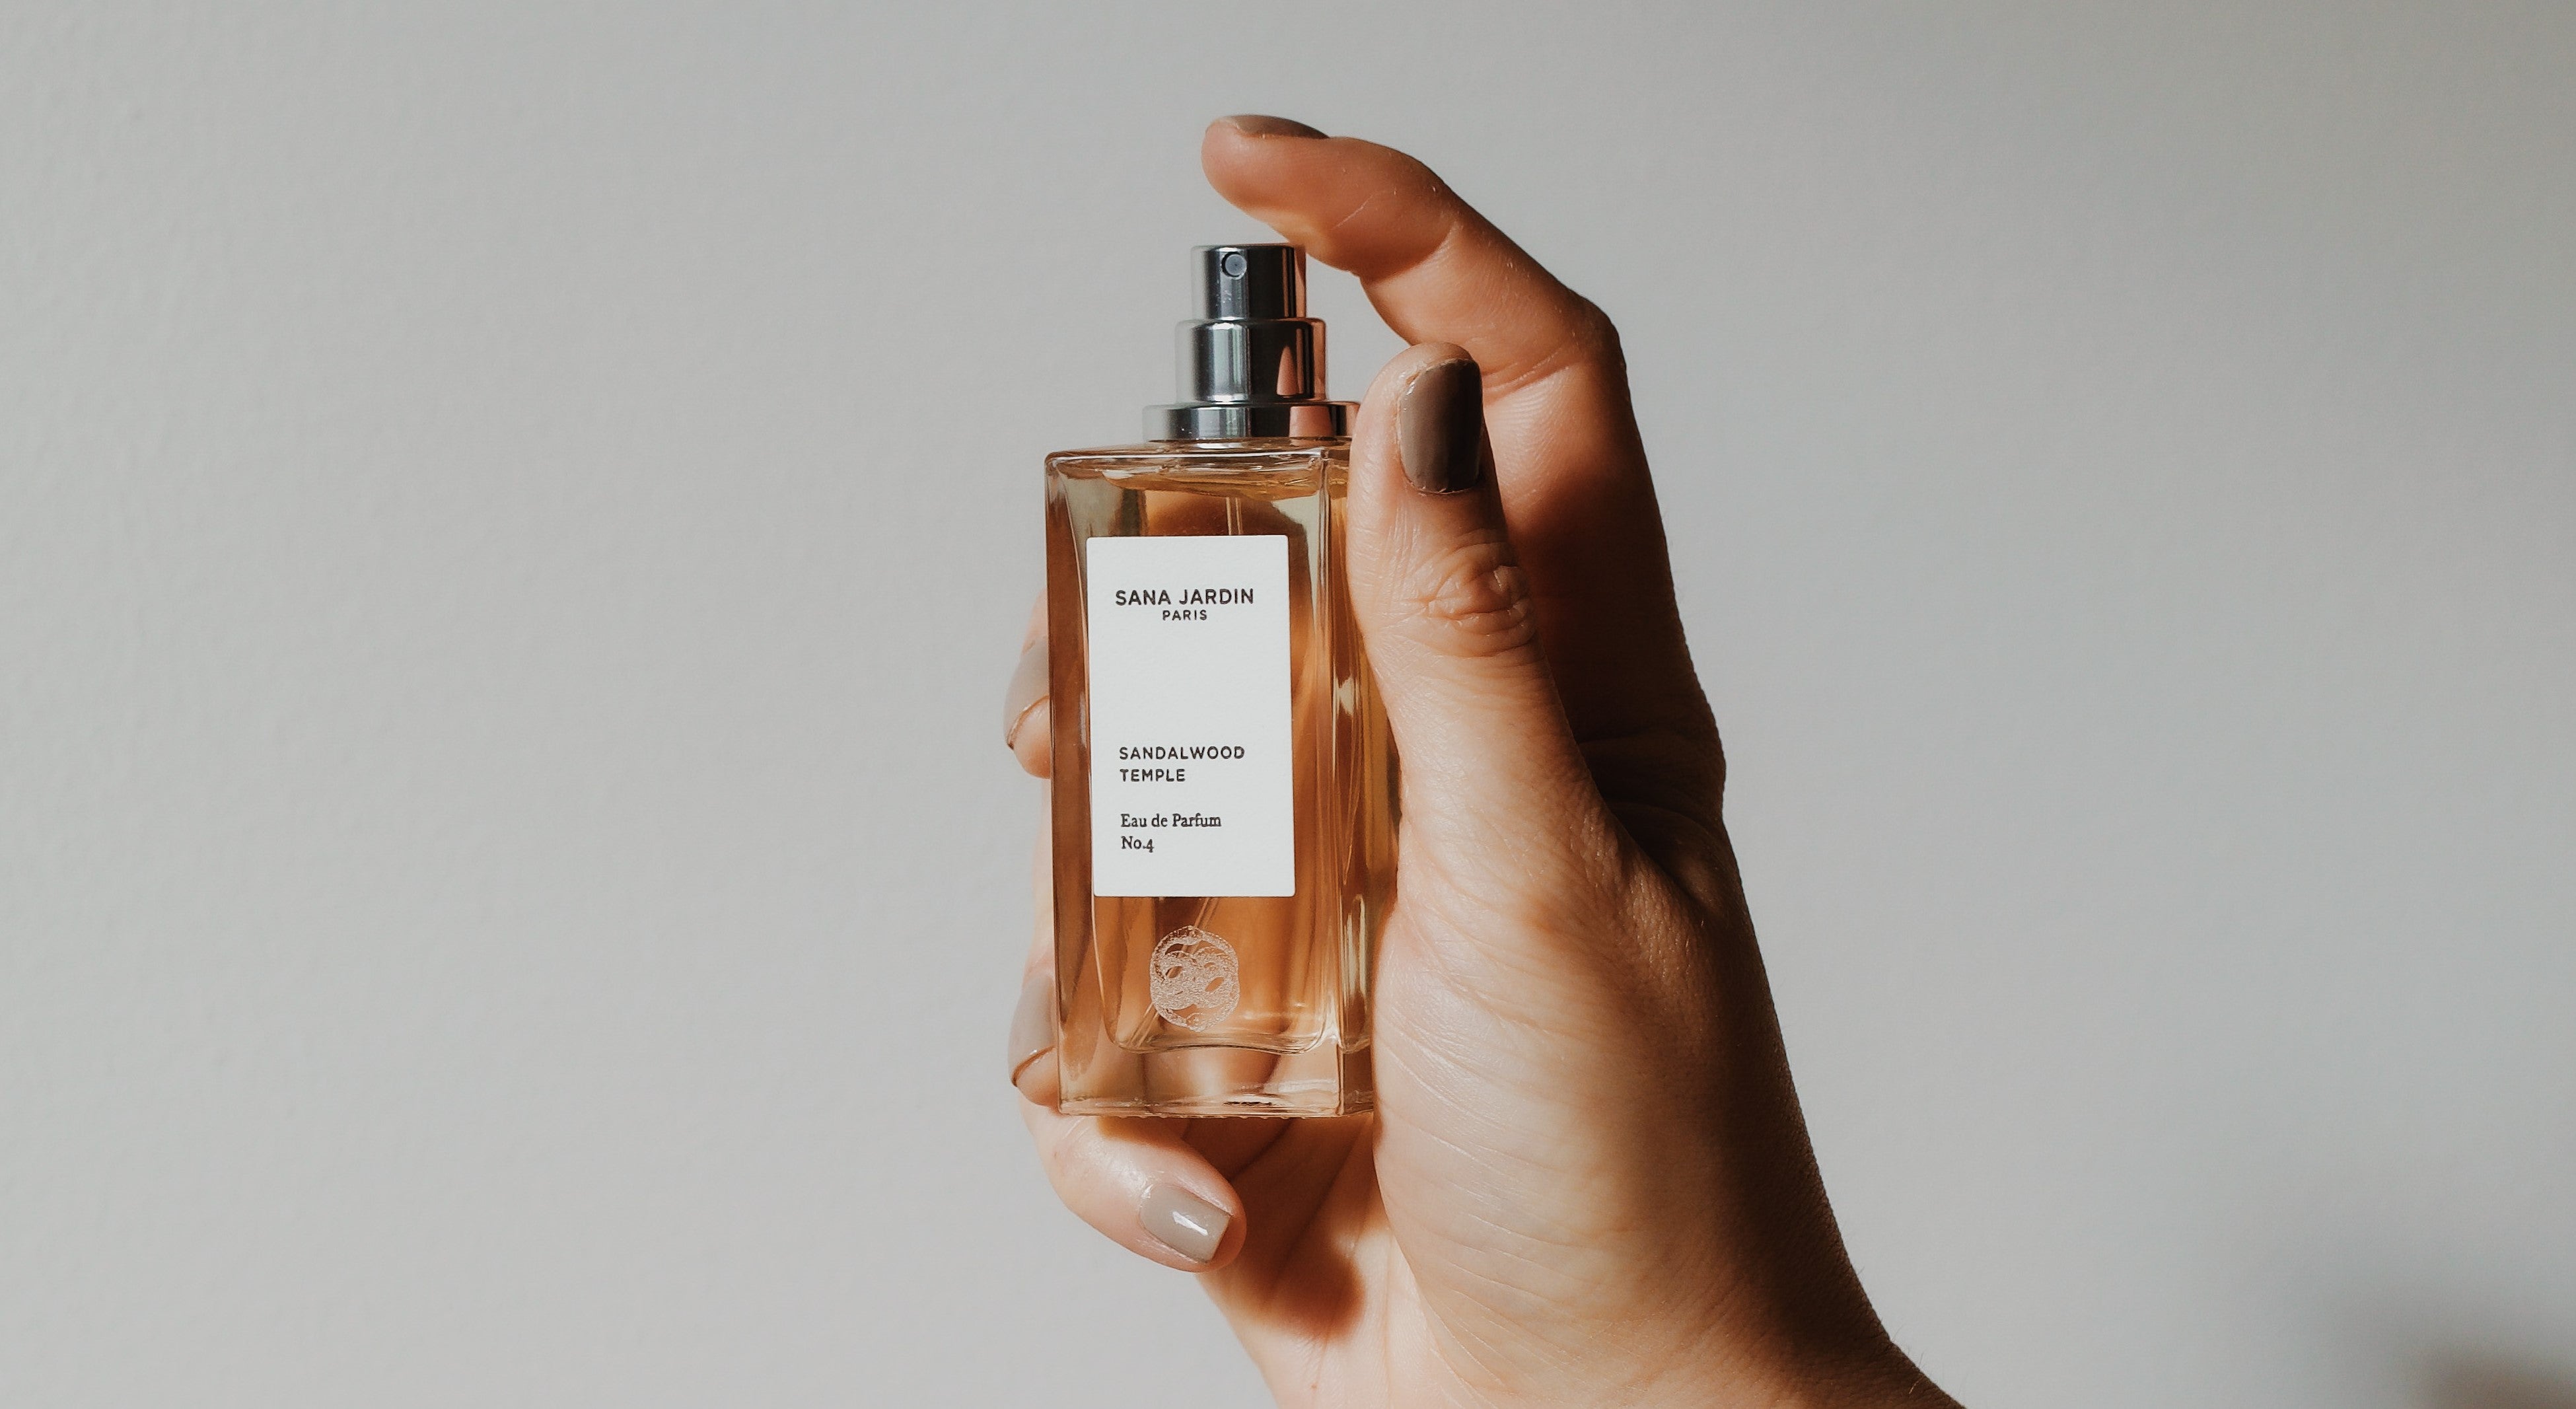 Where to apply fragrance for the longest wear